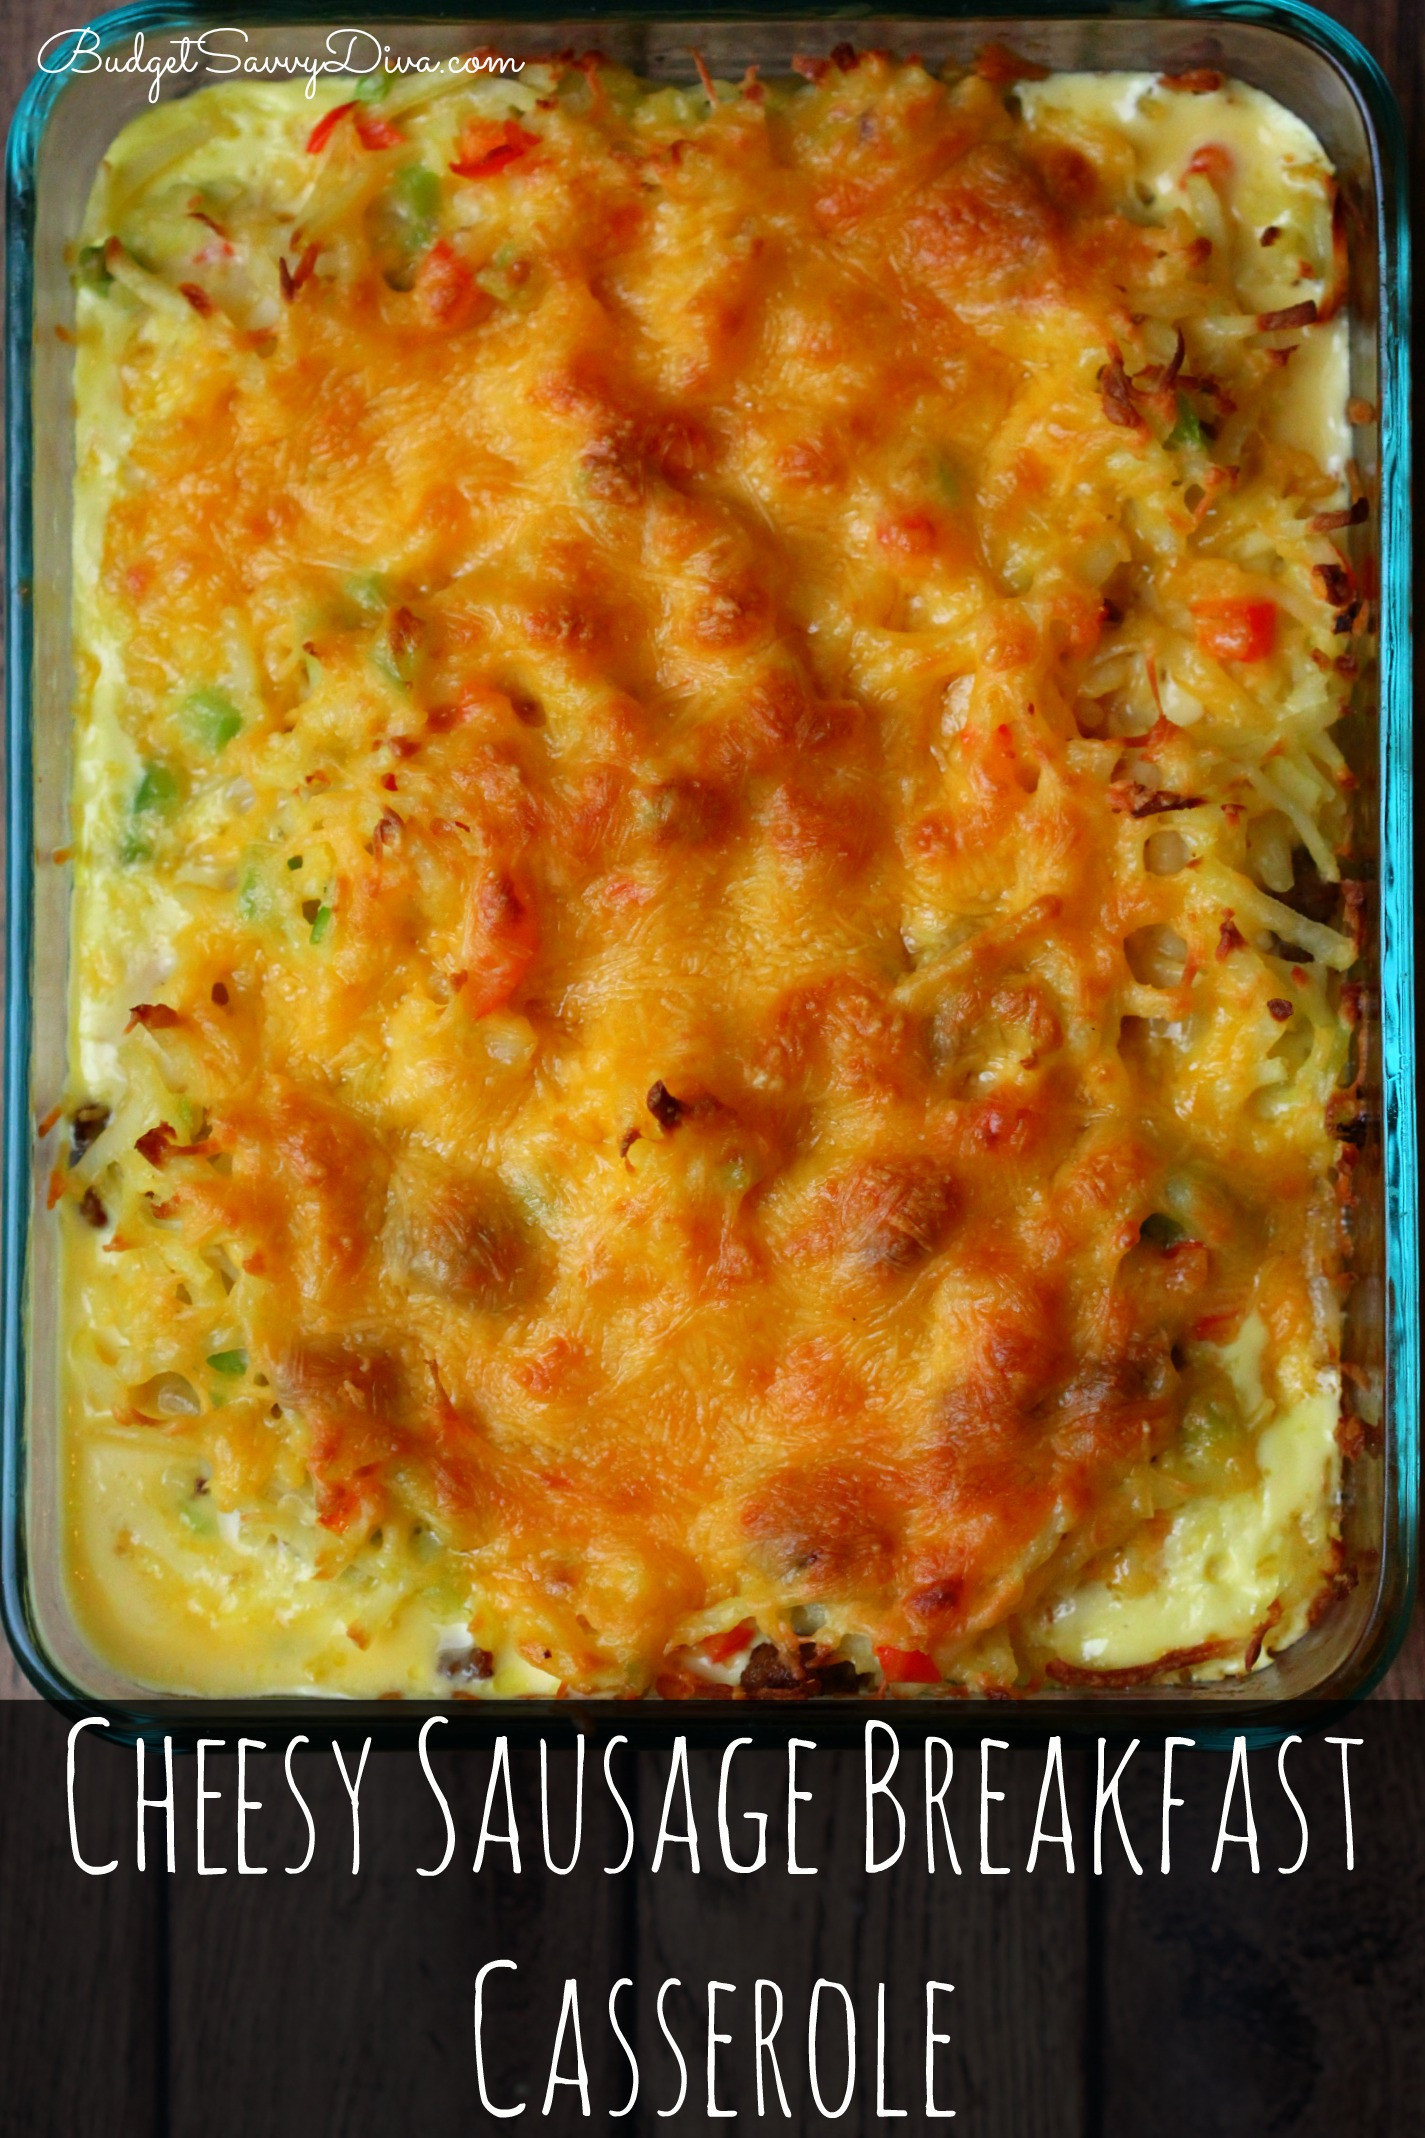 Recipe For Breakfast Casserole With Sausage
 Cheesy Sausage Breakfast Casserole Recipe Bud Savvy Diva